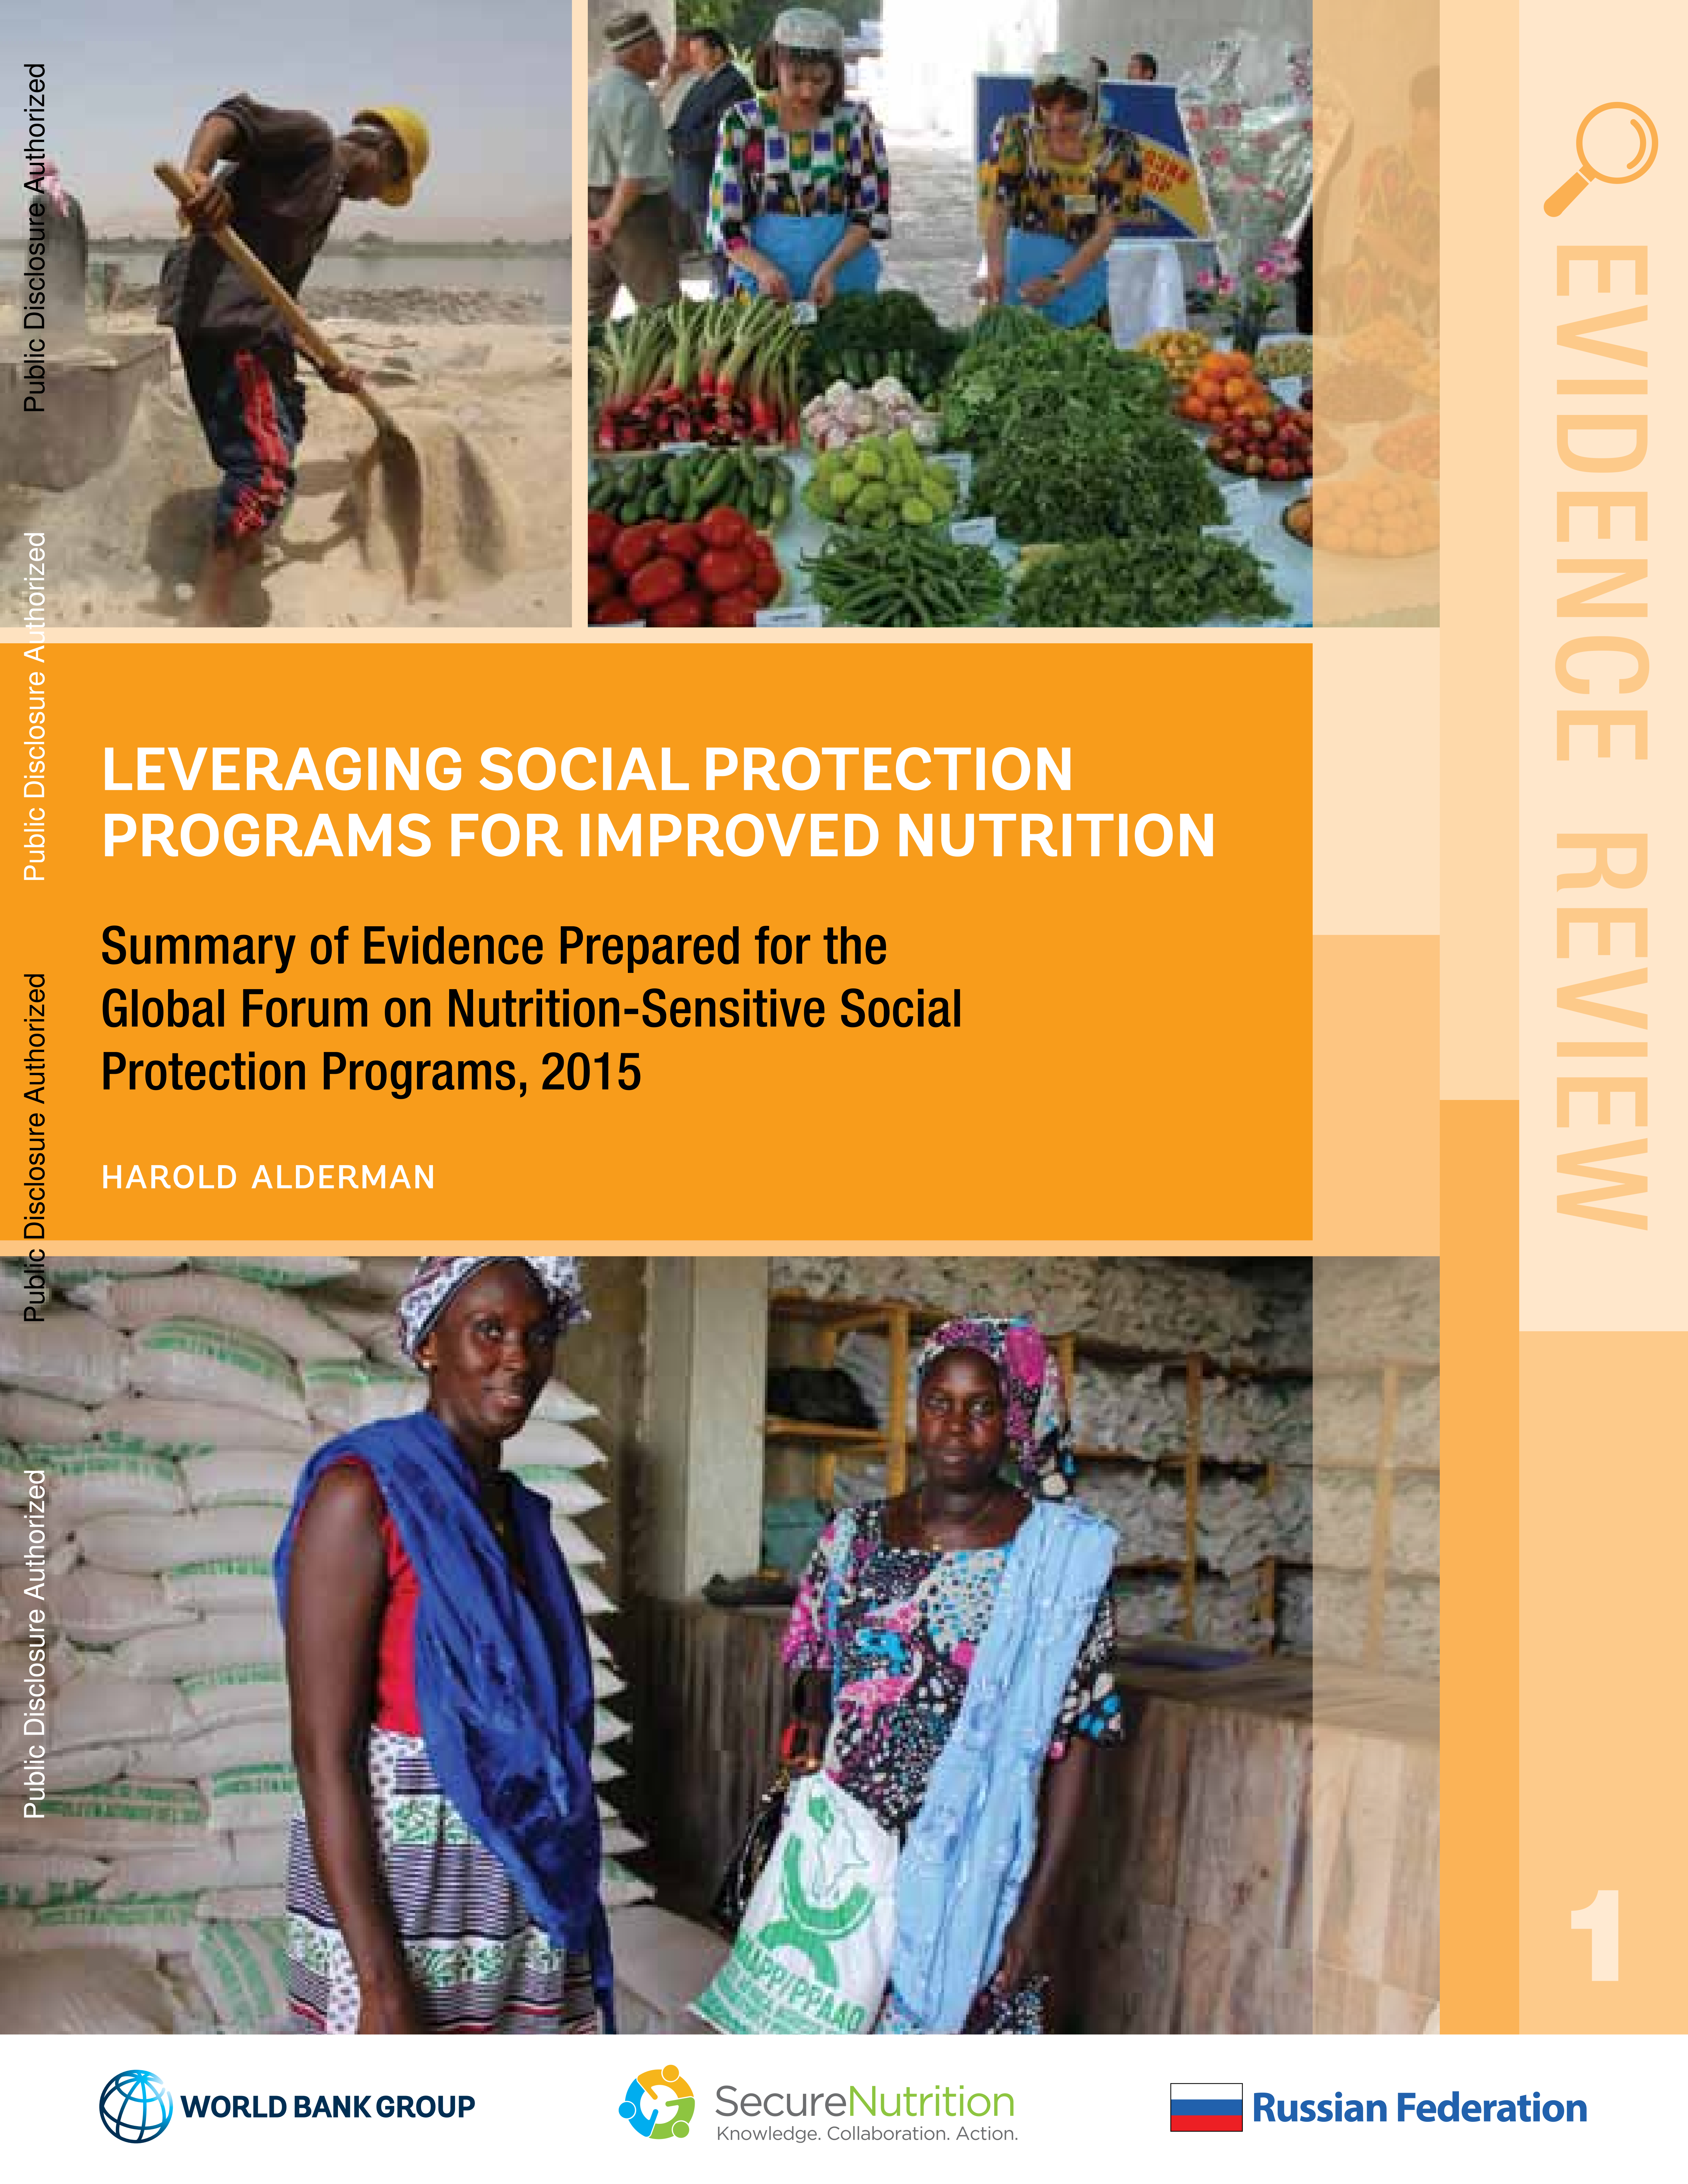 Evidence Review: Leveraging Social Protection Programs for Improved Nutrition